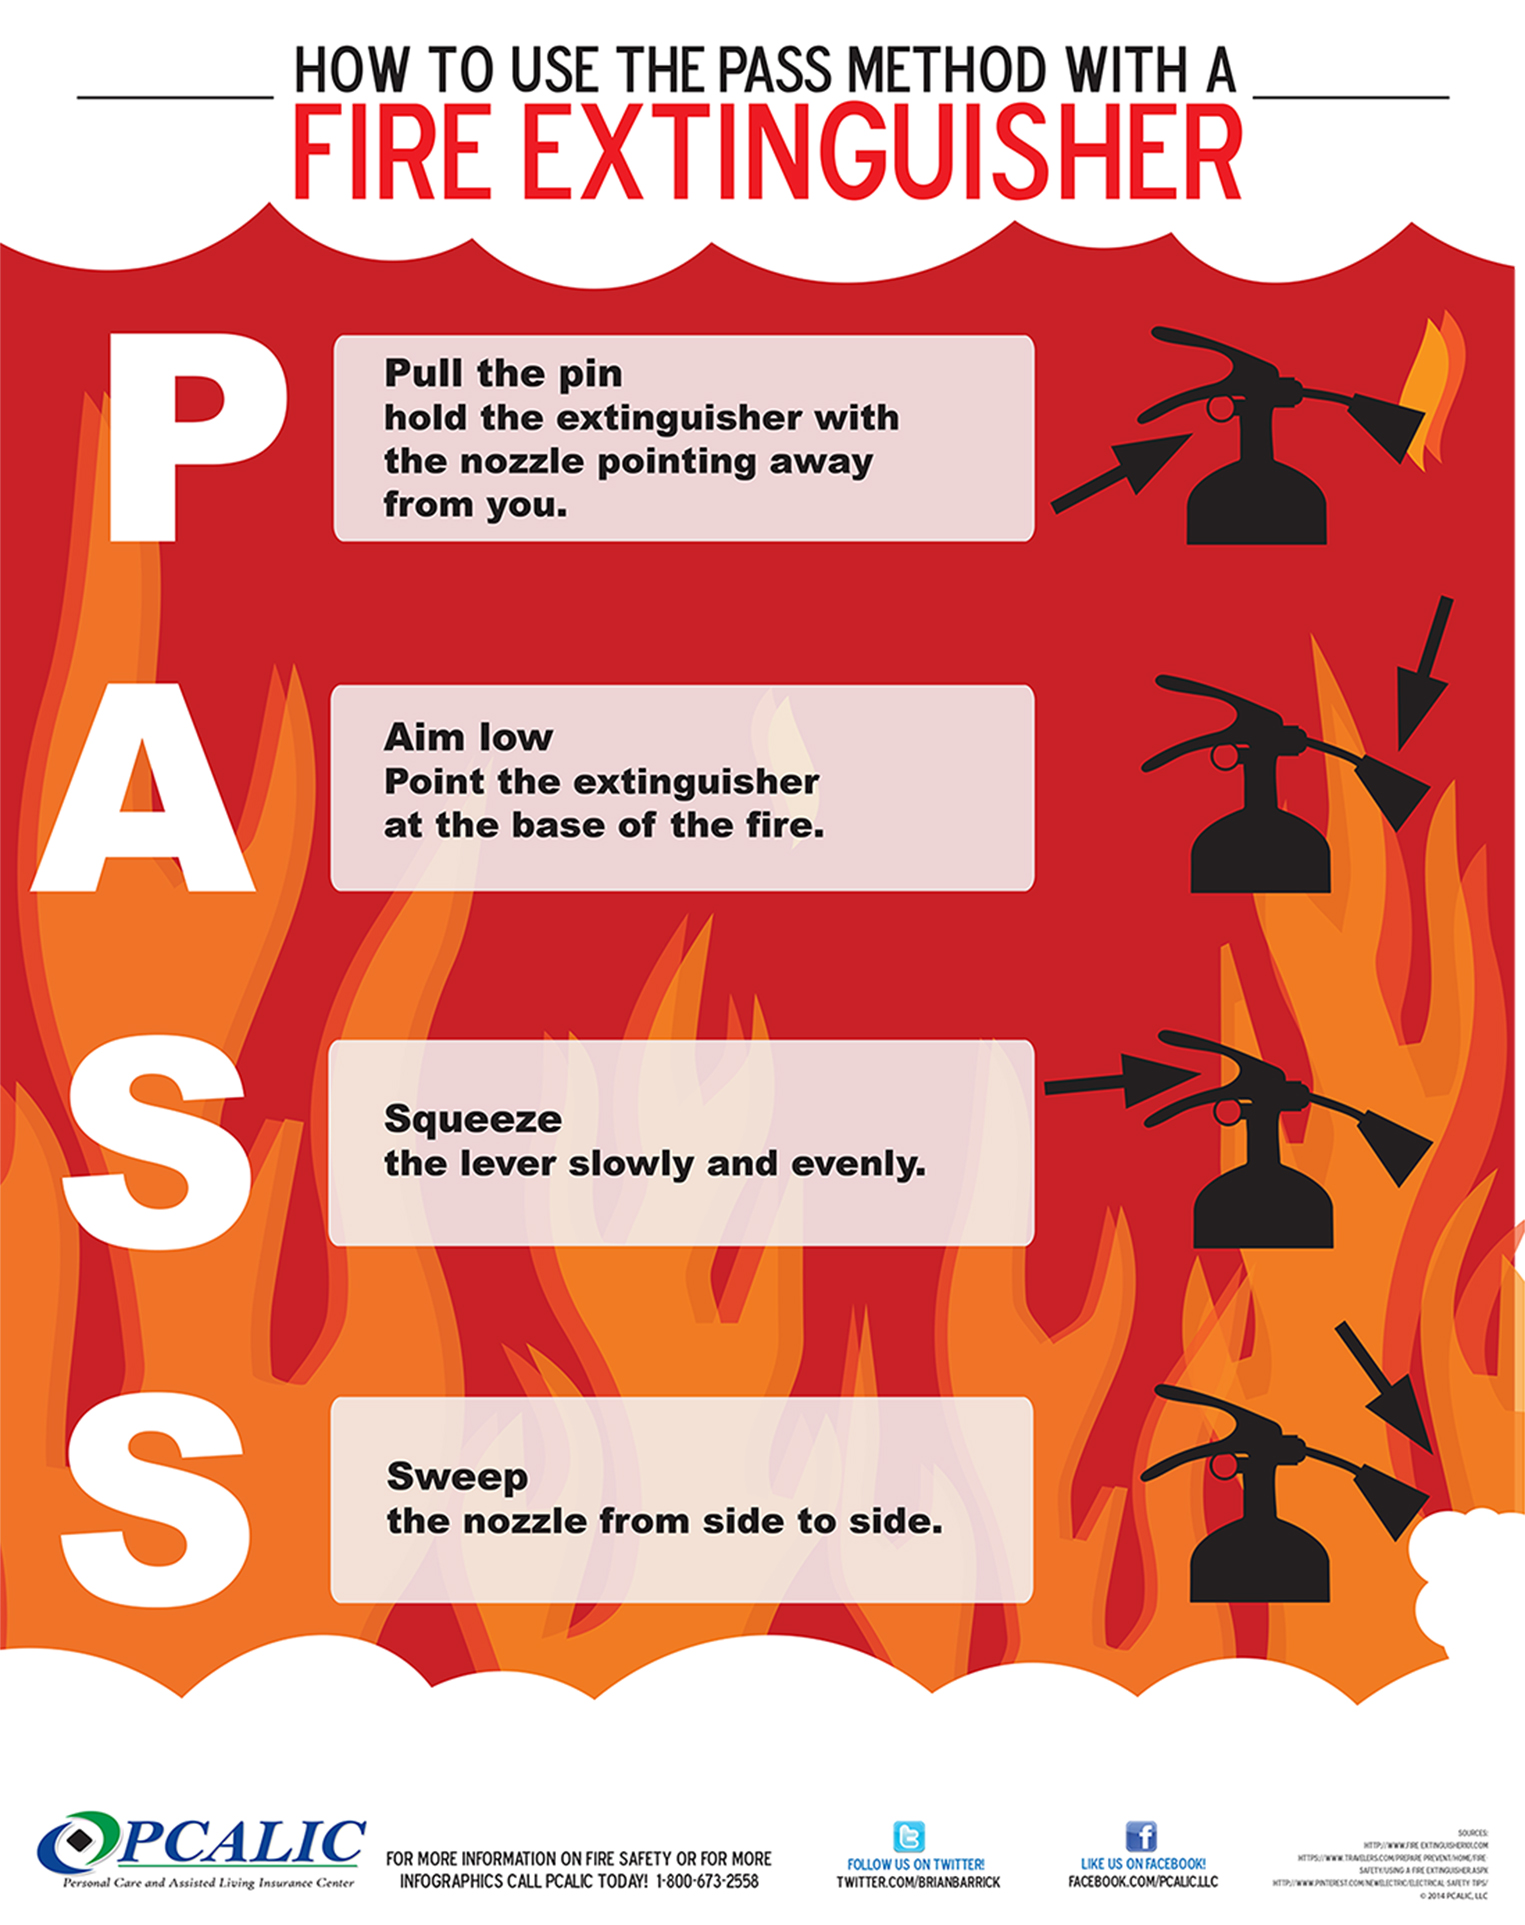 How to us pass method with a Fire Extinguisher